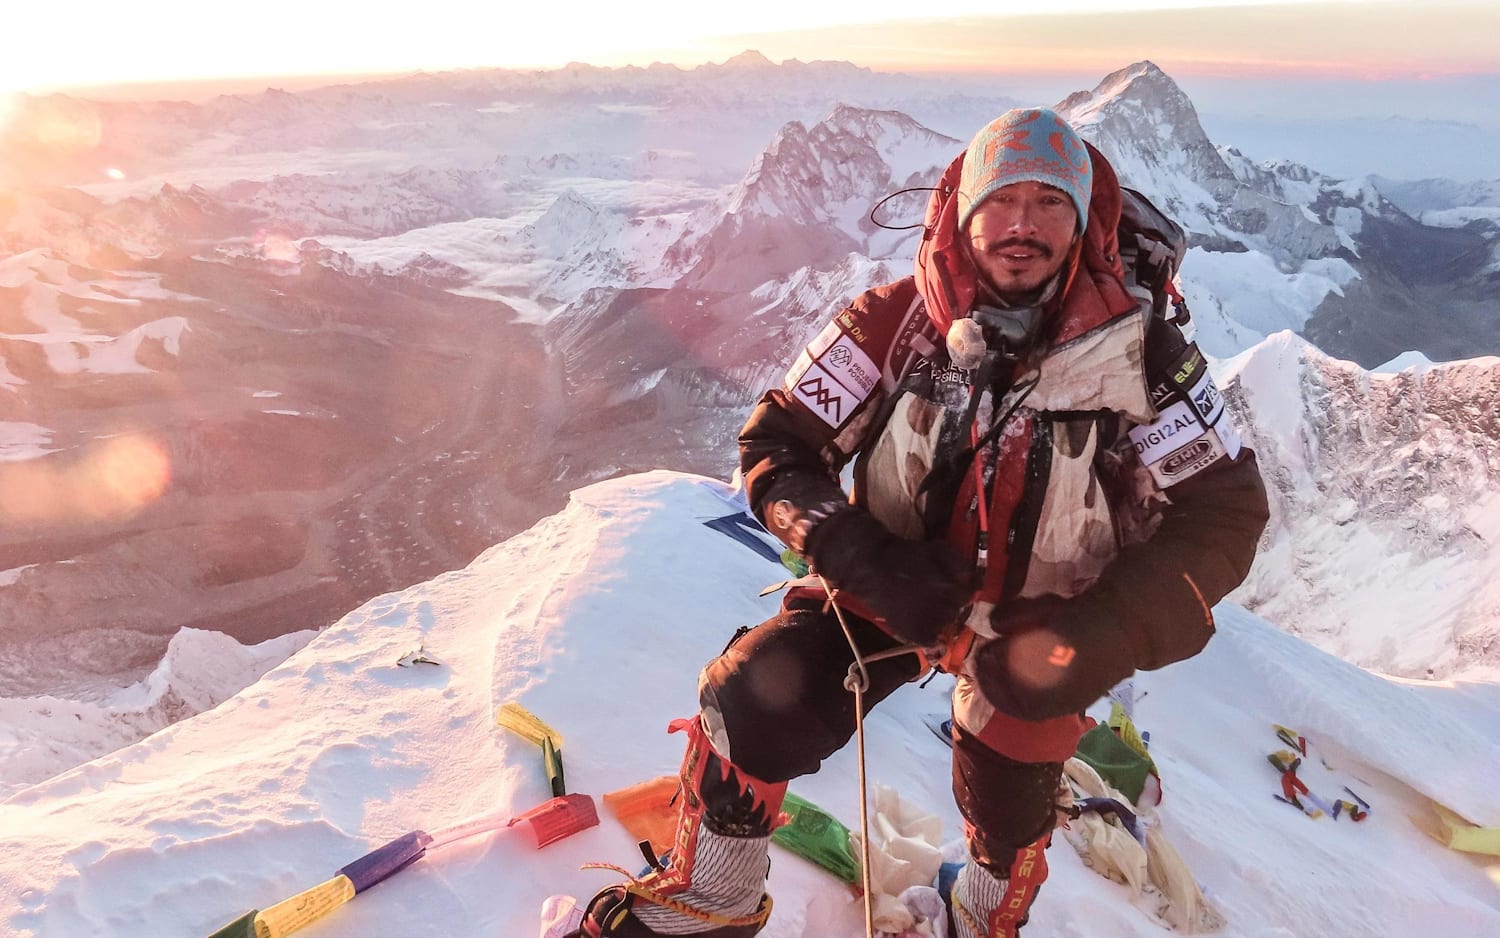 How Everest is Affecting Nepal - The Borgen Project